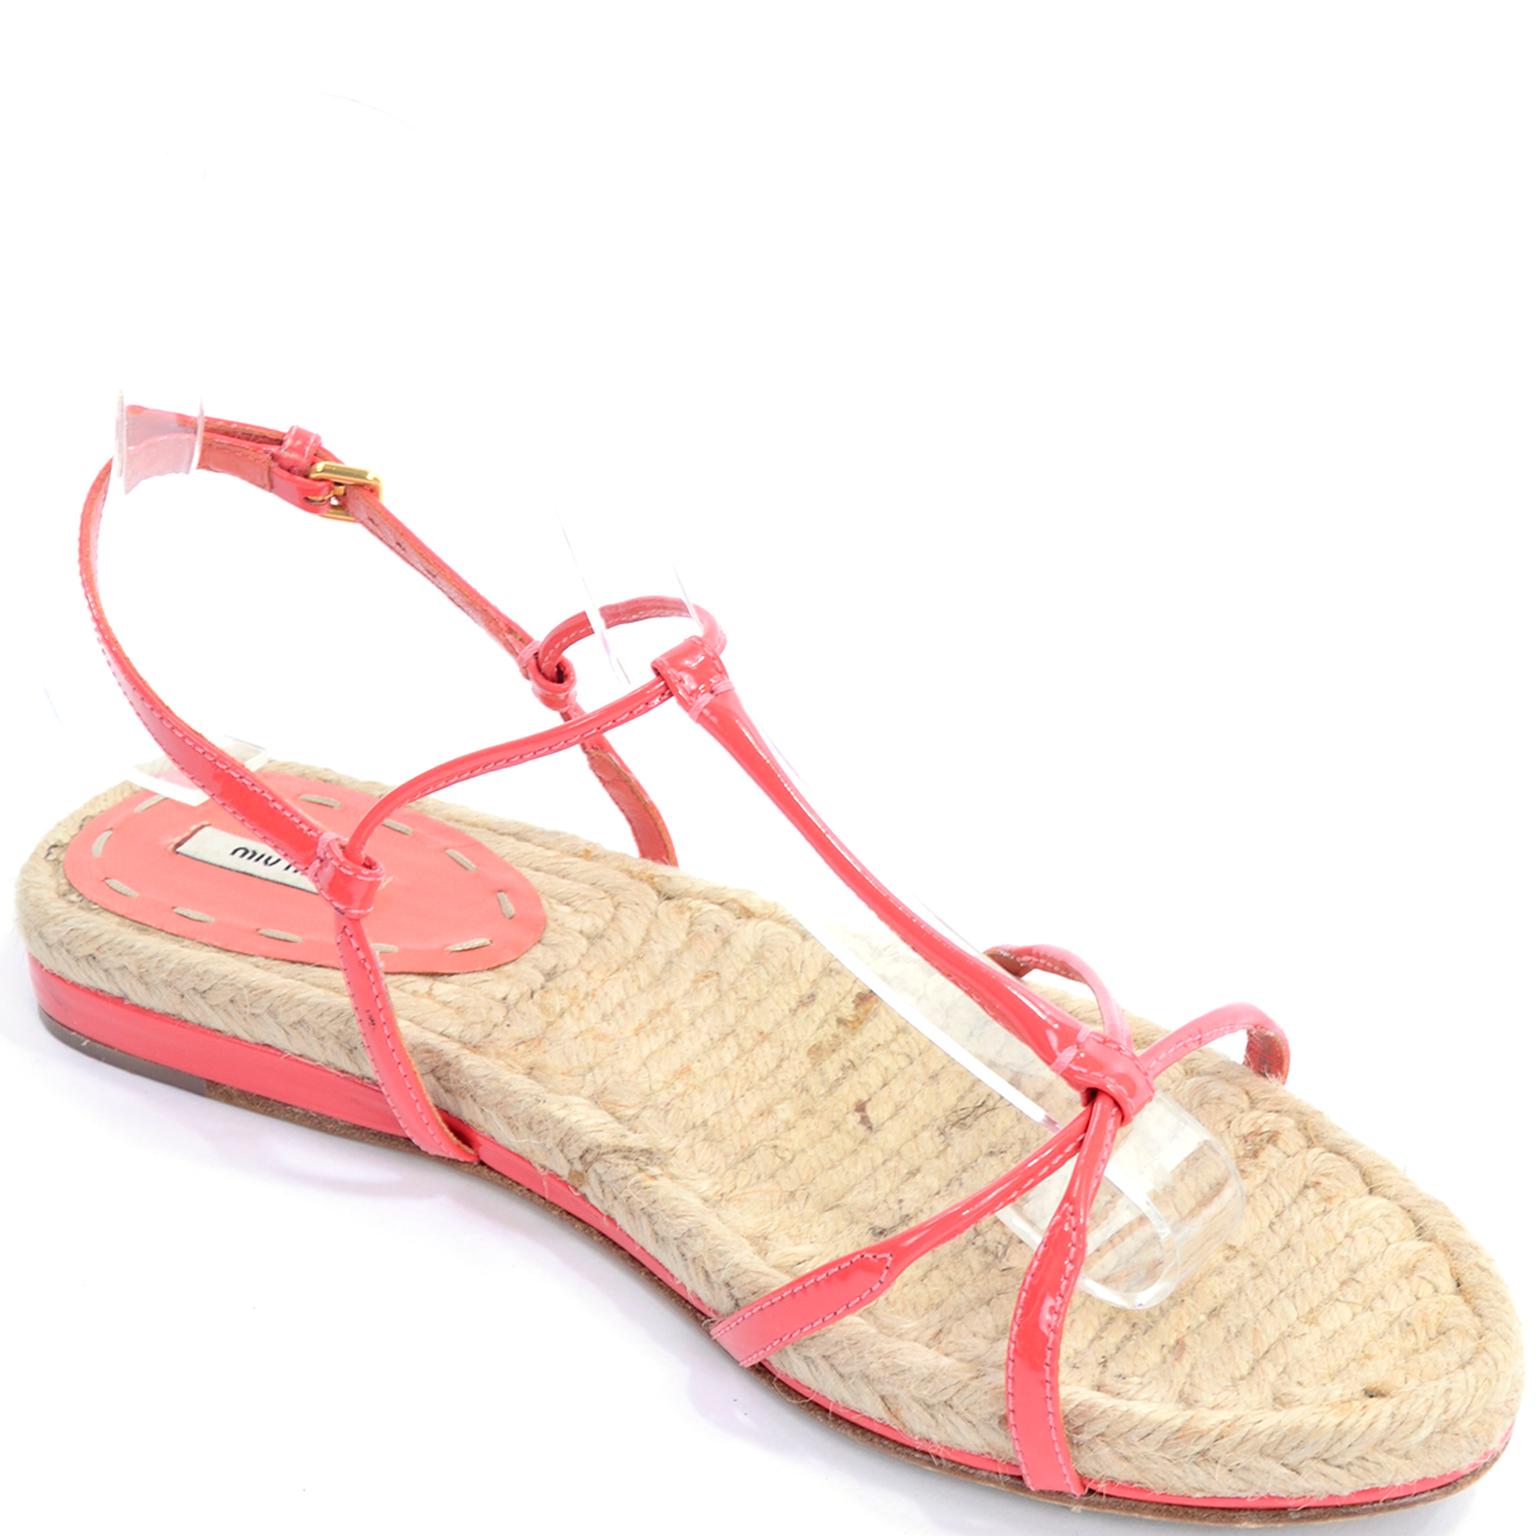 Miu Miu Coral Ankle Strap Leather & Woven Straw Sandals Size 37	 In Excellent Condition For Sale In Portland, OR